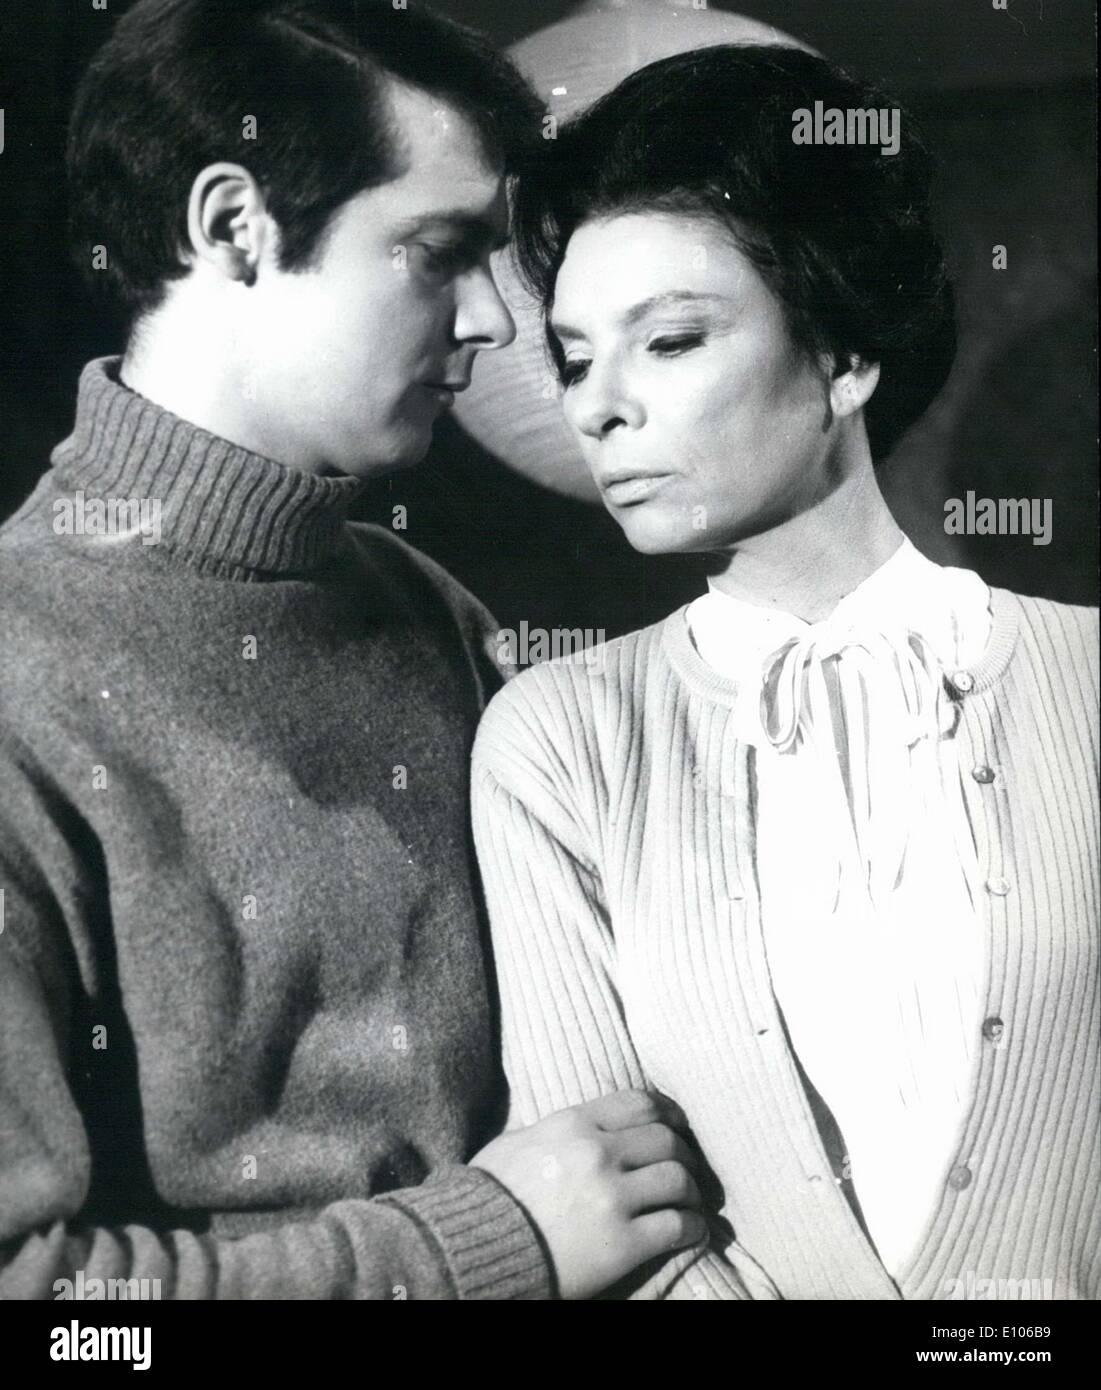 Jan. 20, 1970 - Pictured are actress Agnes Fink(as Mrs. Weiss) and Goran Ebel(as her son Robin) in the film ''Dreissig Silberlinge.'' The movie was directed by Illo von Janko. The story is about a woman named Mrs. Weiss in London who works as a cleaning lady and her studious son Robin. Stock Photo